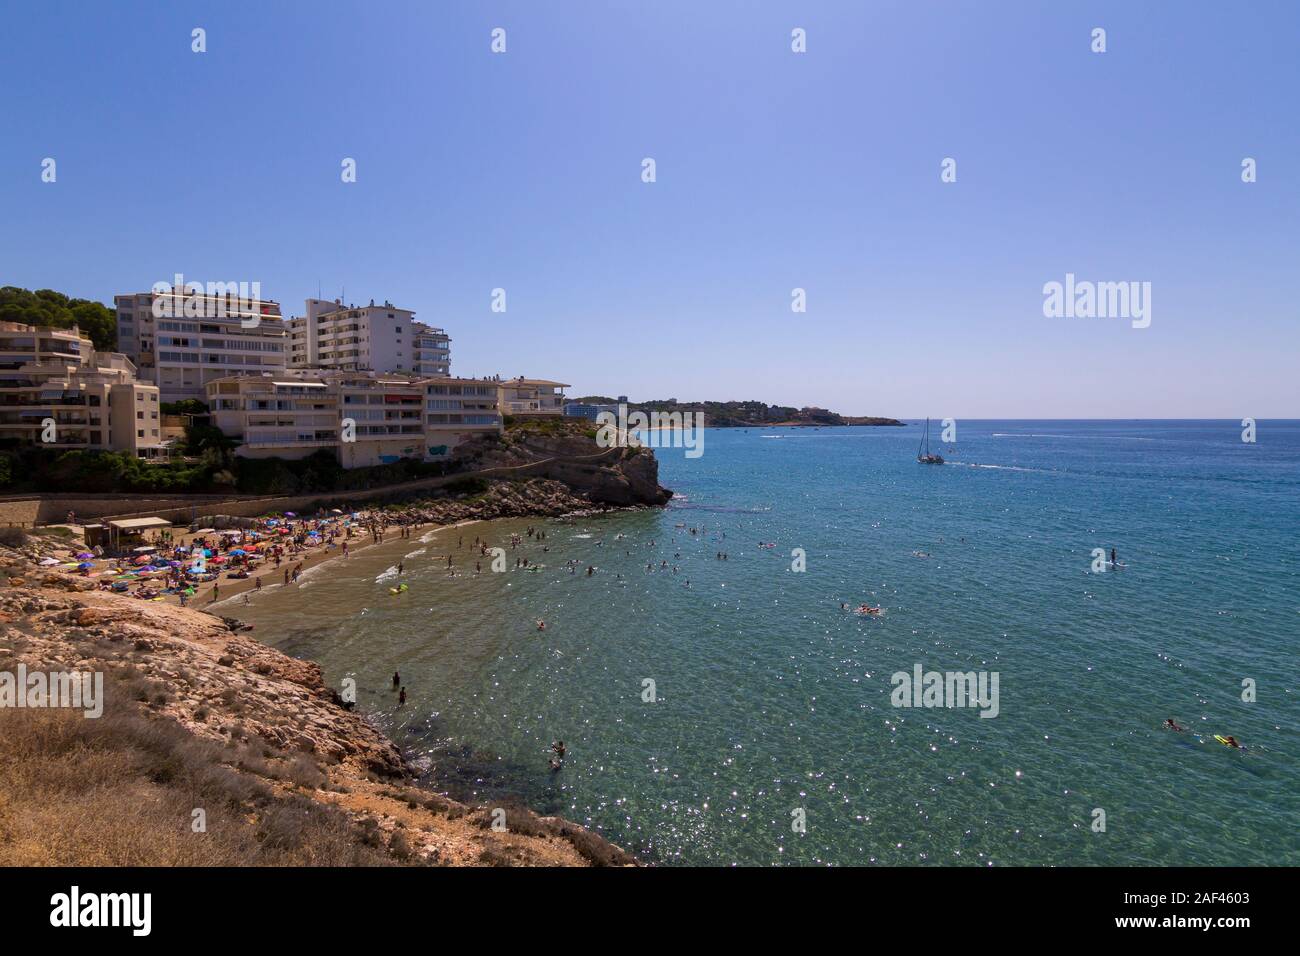 People having fun at Cala Llenguadets beach in Salou, a famous tourist destination at summer in Spain Stock Photo